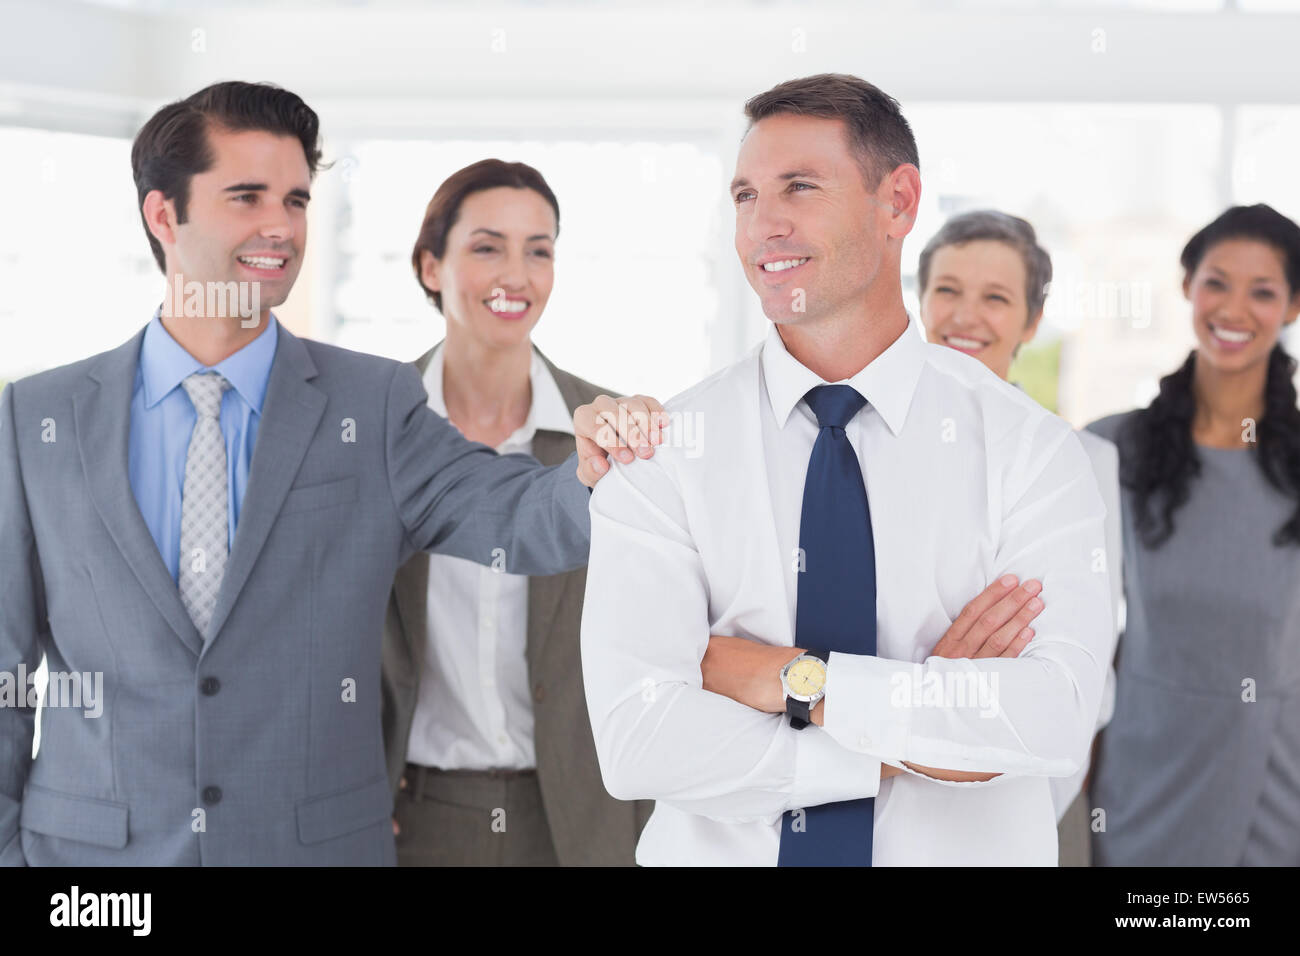 Business people congratulating their colleague Stock Photo